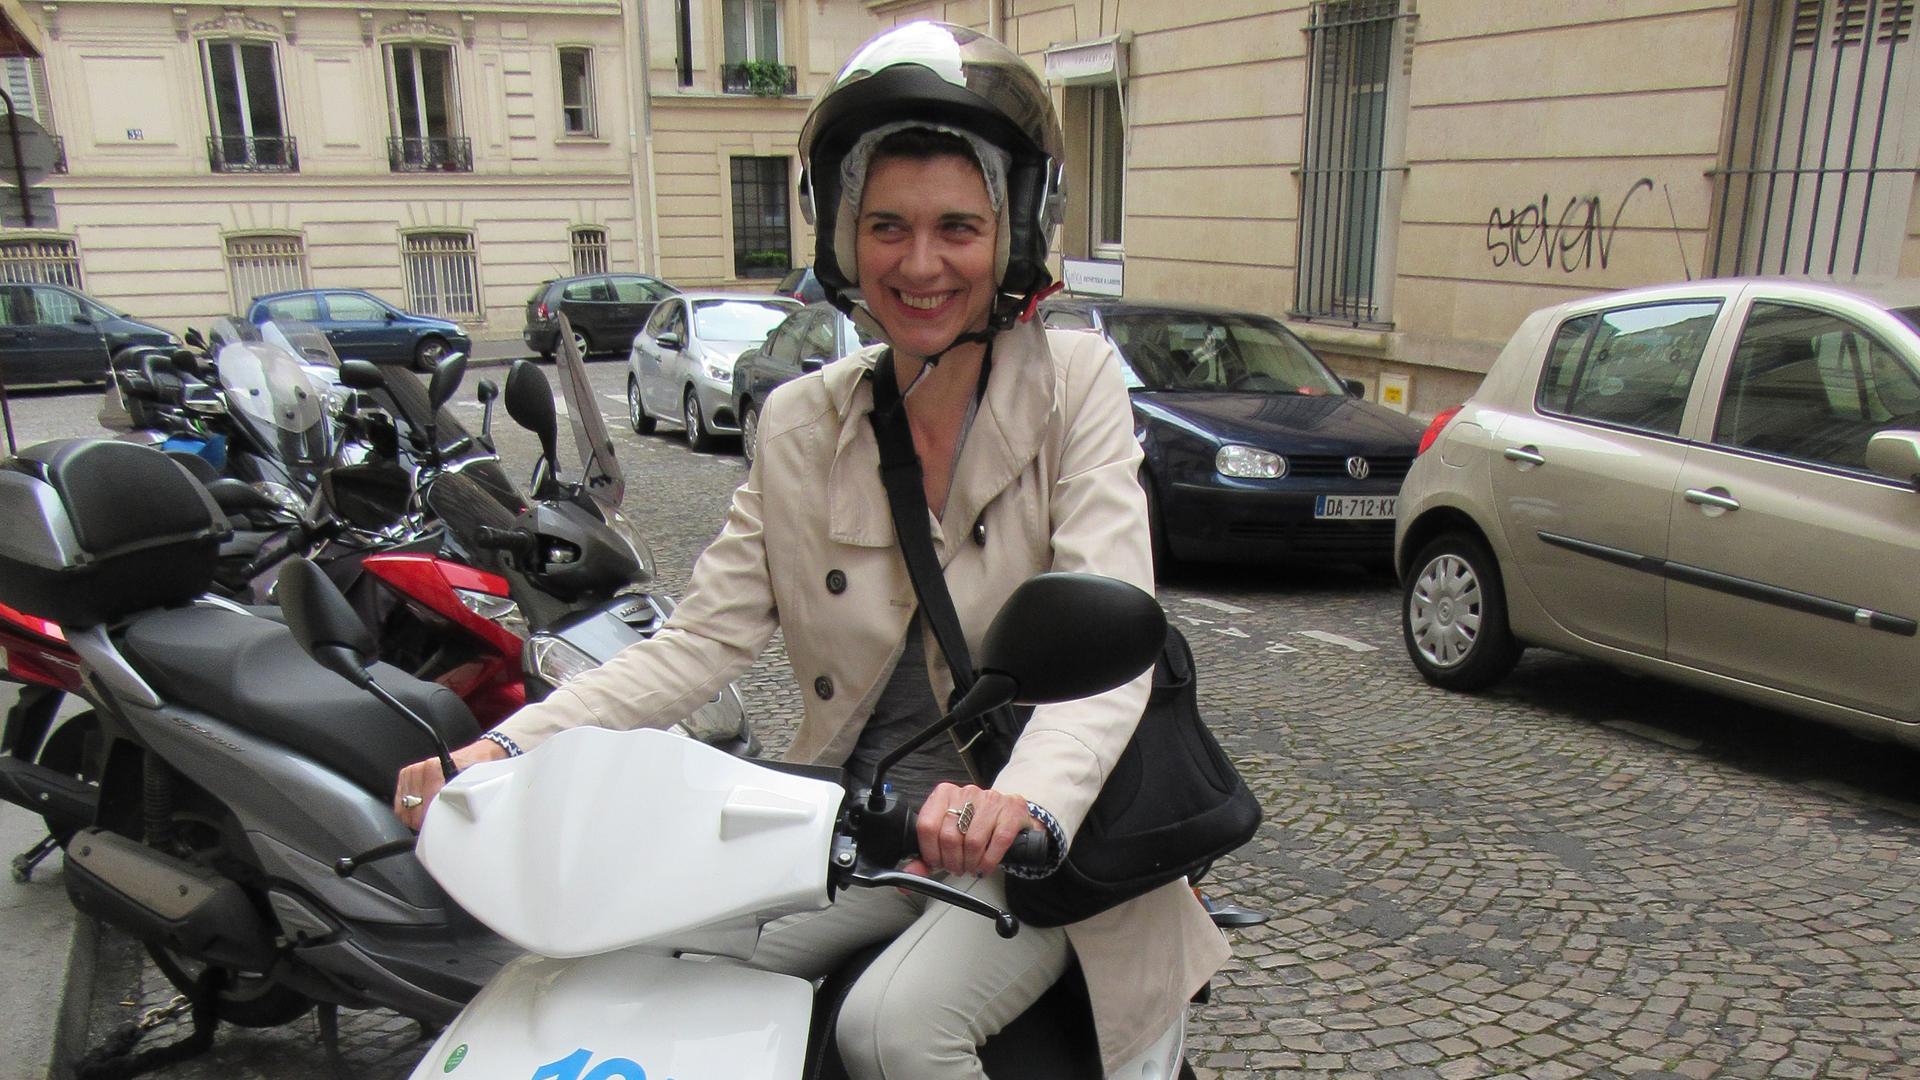 The author tries out CityScoot